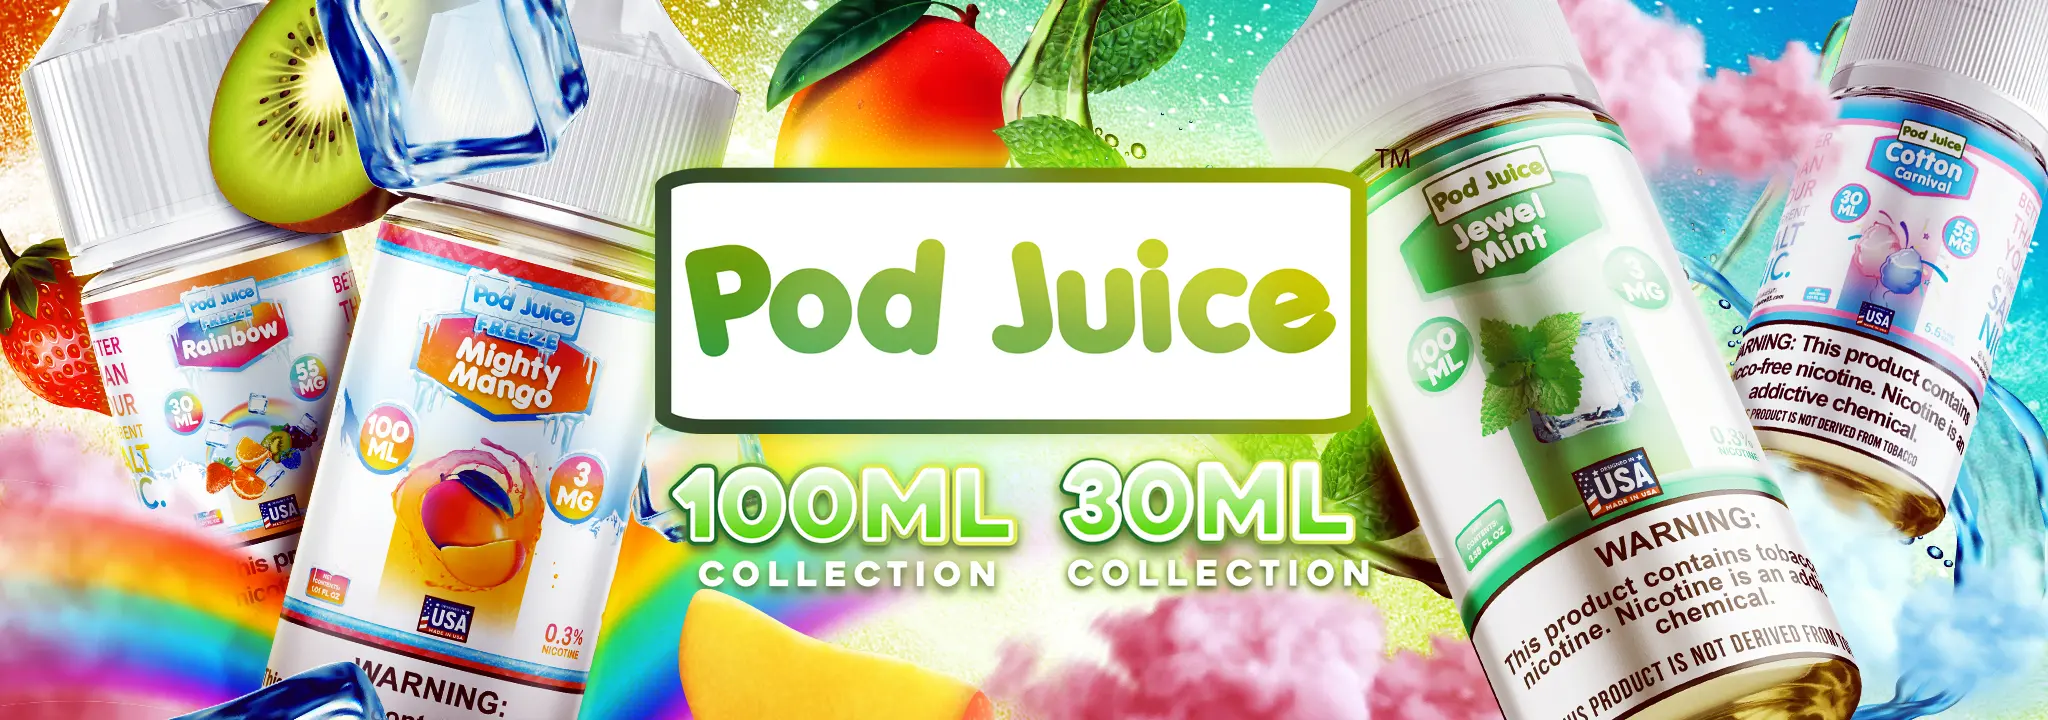 Pod Juice 100ML and 30ML banner with 4 flavors